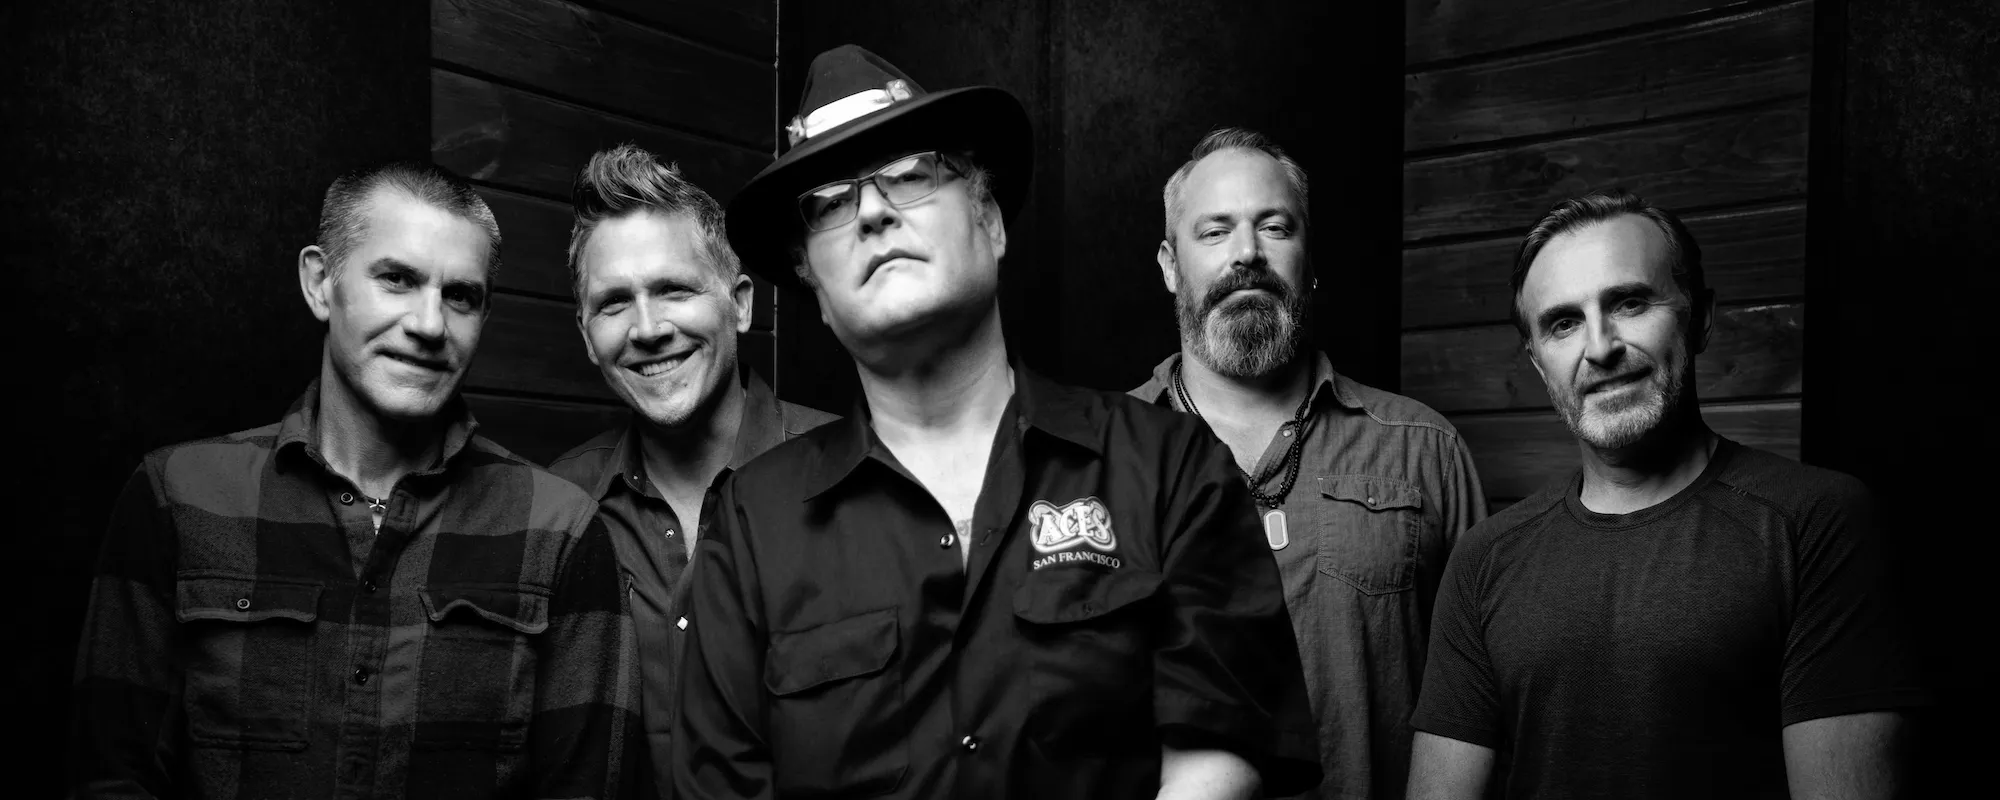 Six Songs You Didn’t Know Featured Harmonica Master John Popper